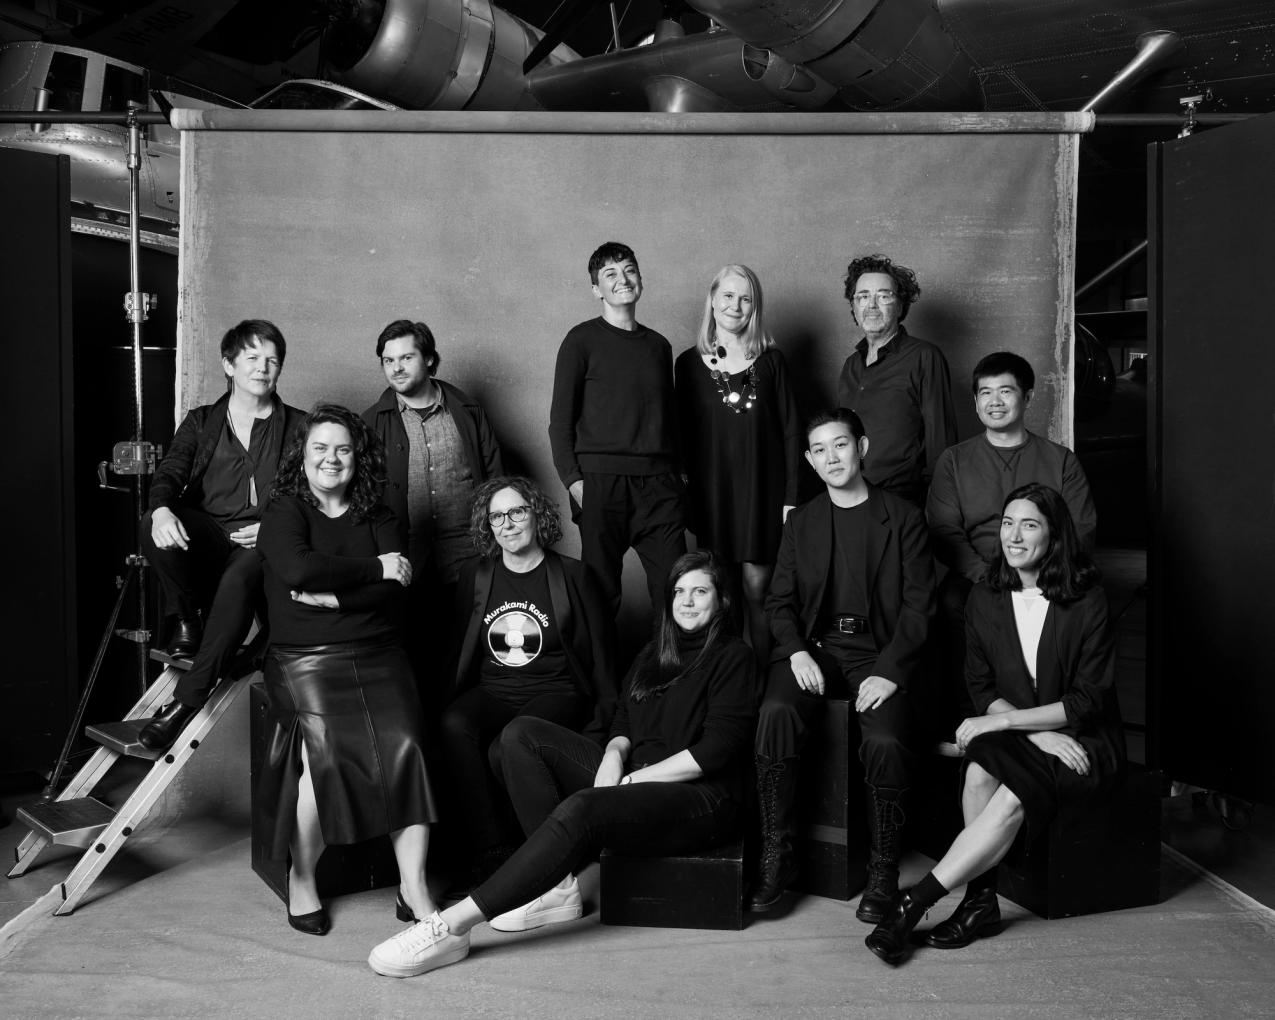 Group of people in black clothing pose in front of a background in a photo studio